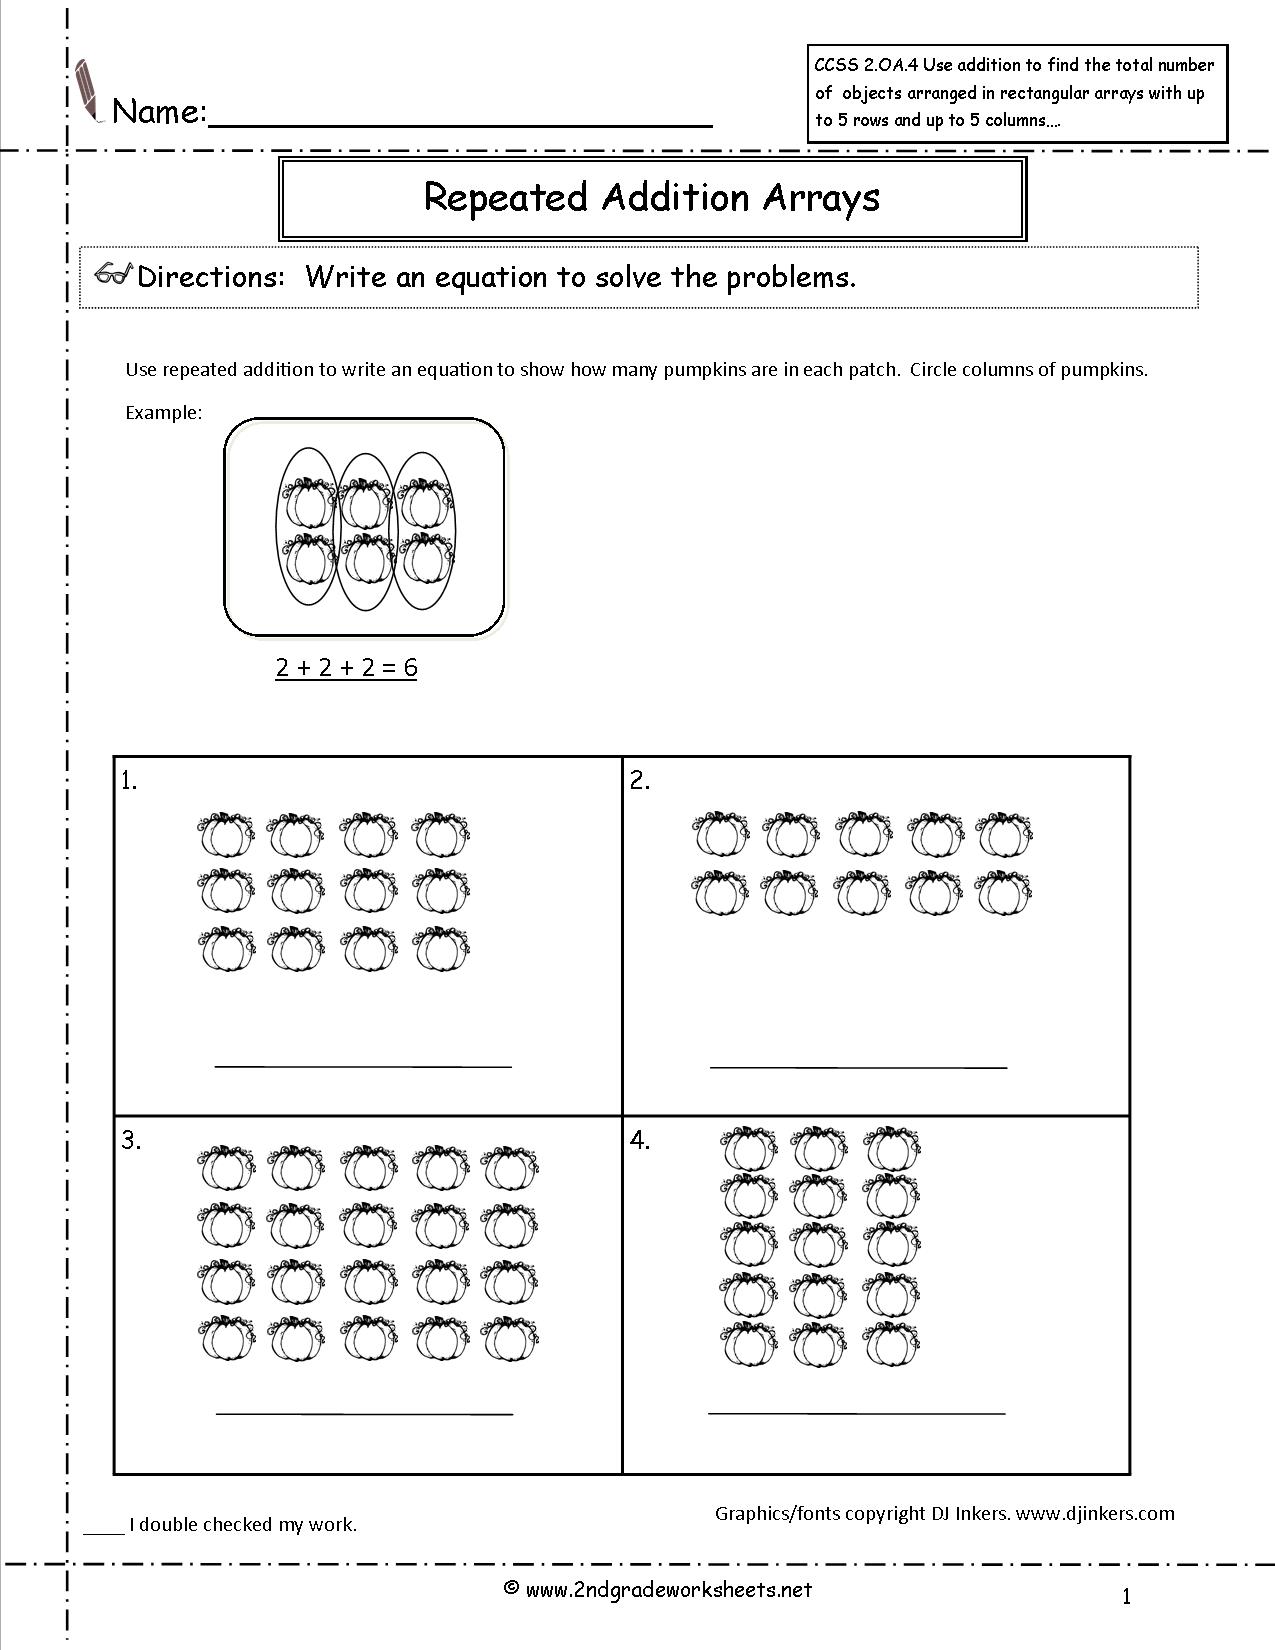 12-best-images-of-pumpkin-addition-worksheet-repeated-addition-arrays-worksheets-expanded